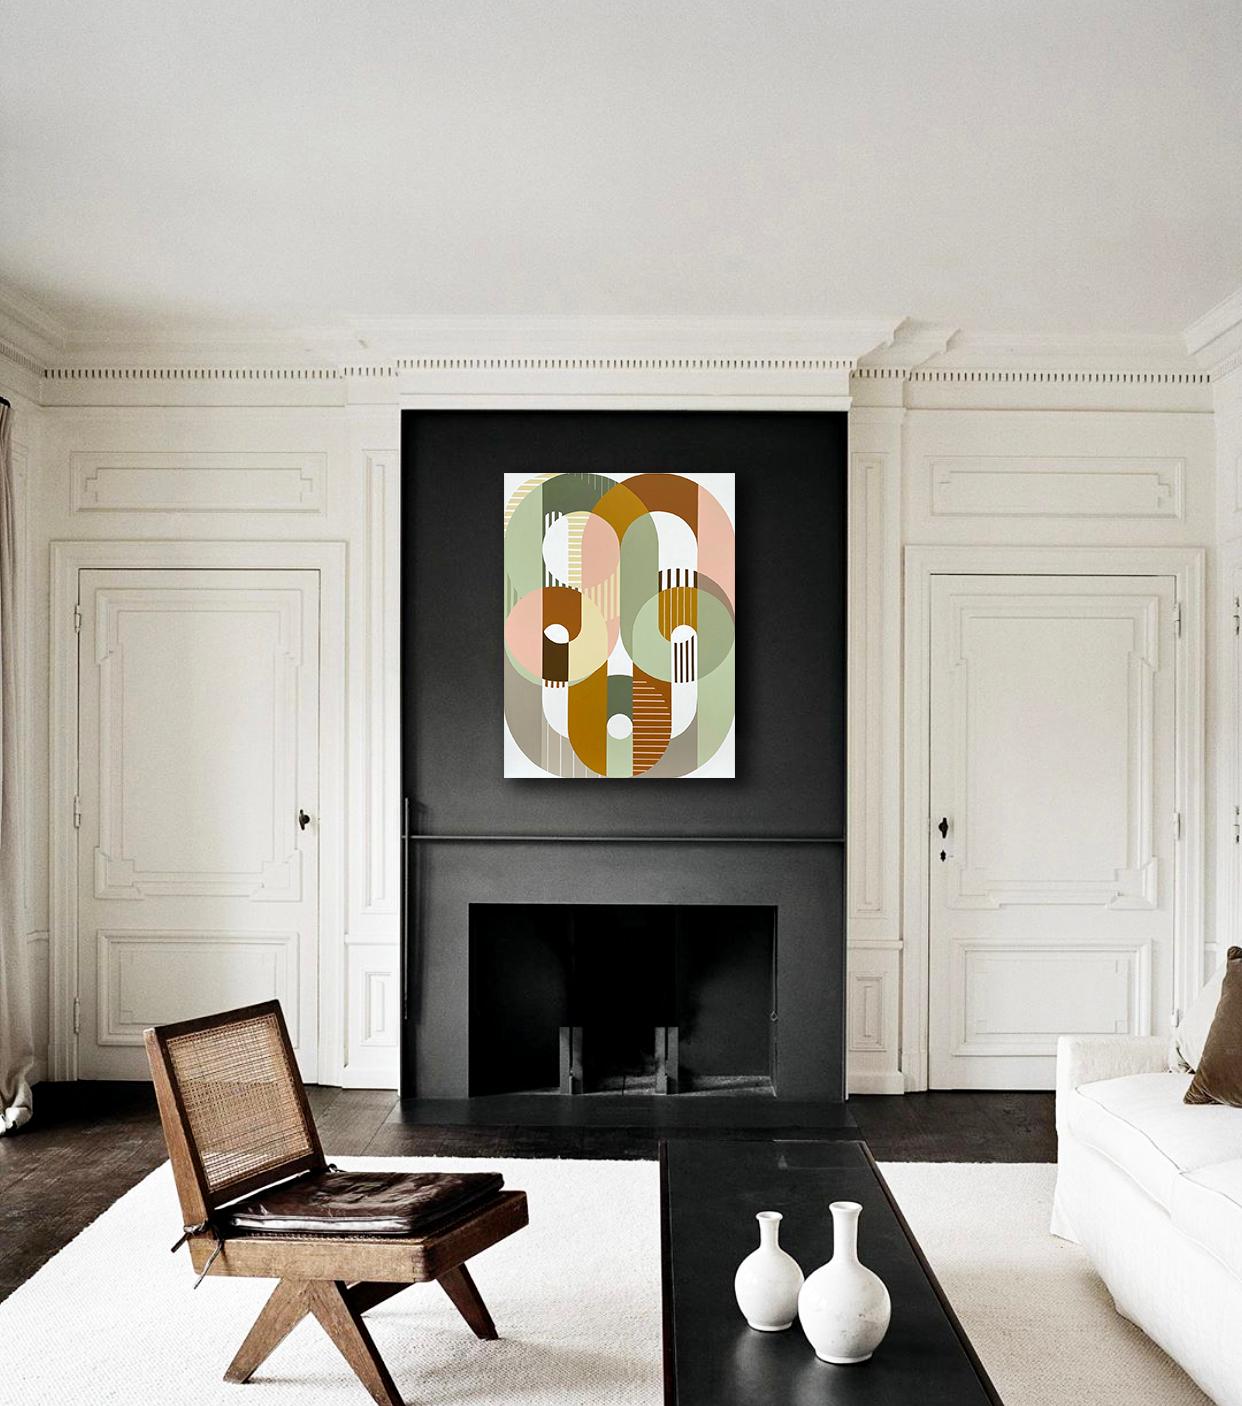 Changes, abstract geometric painting, mid-century modern soft color palette - Painting by Kazaan Viveiros